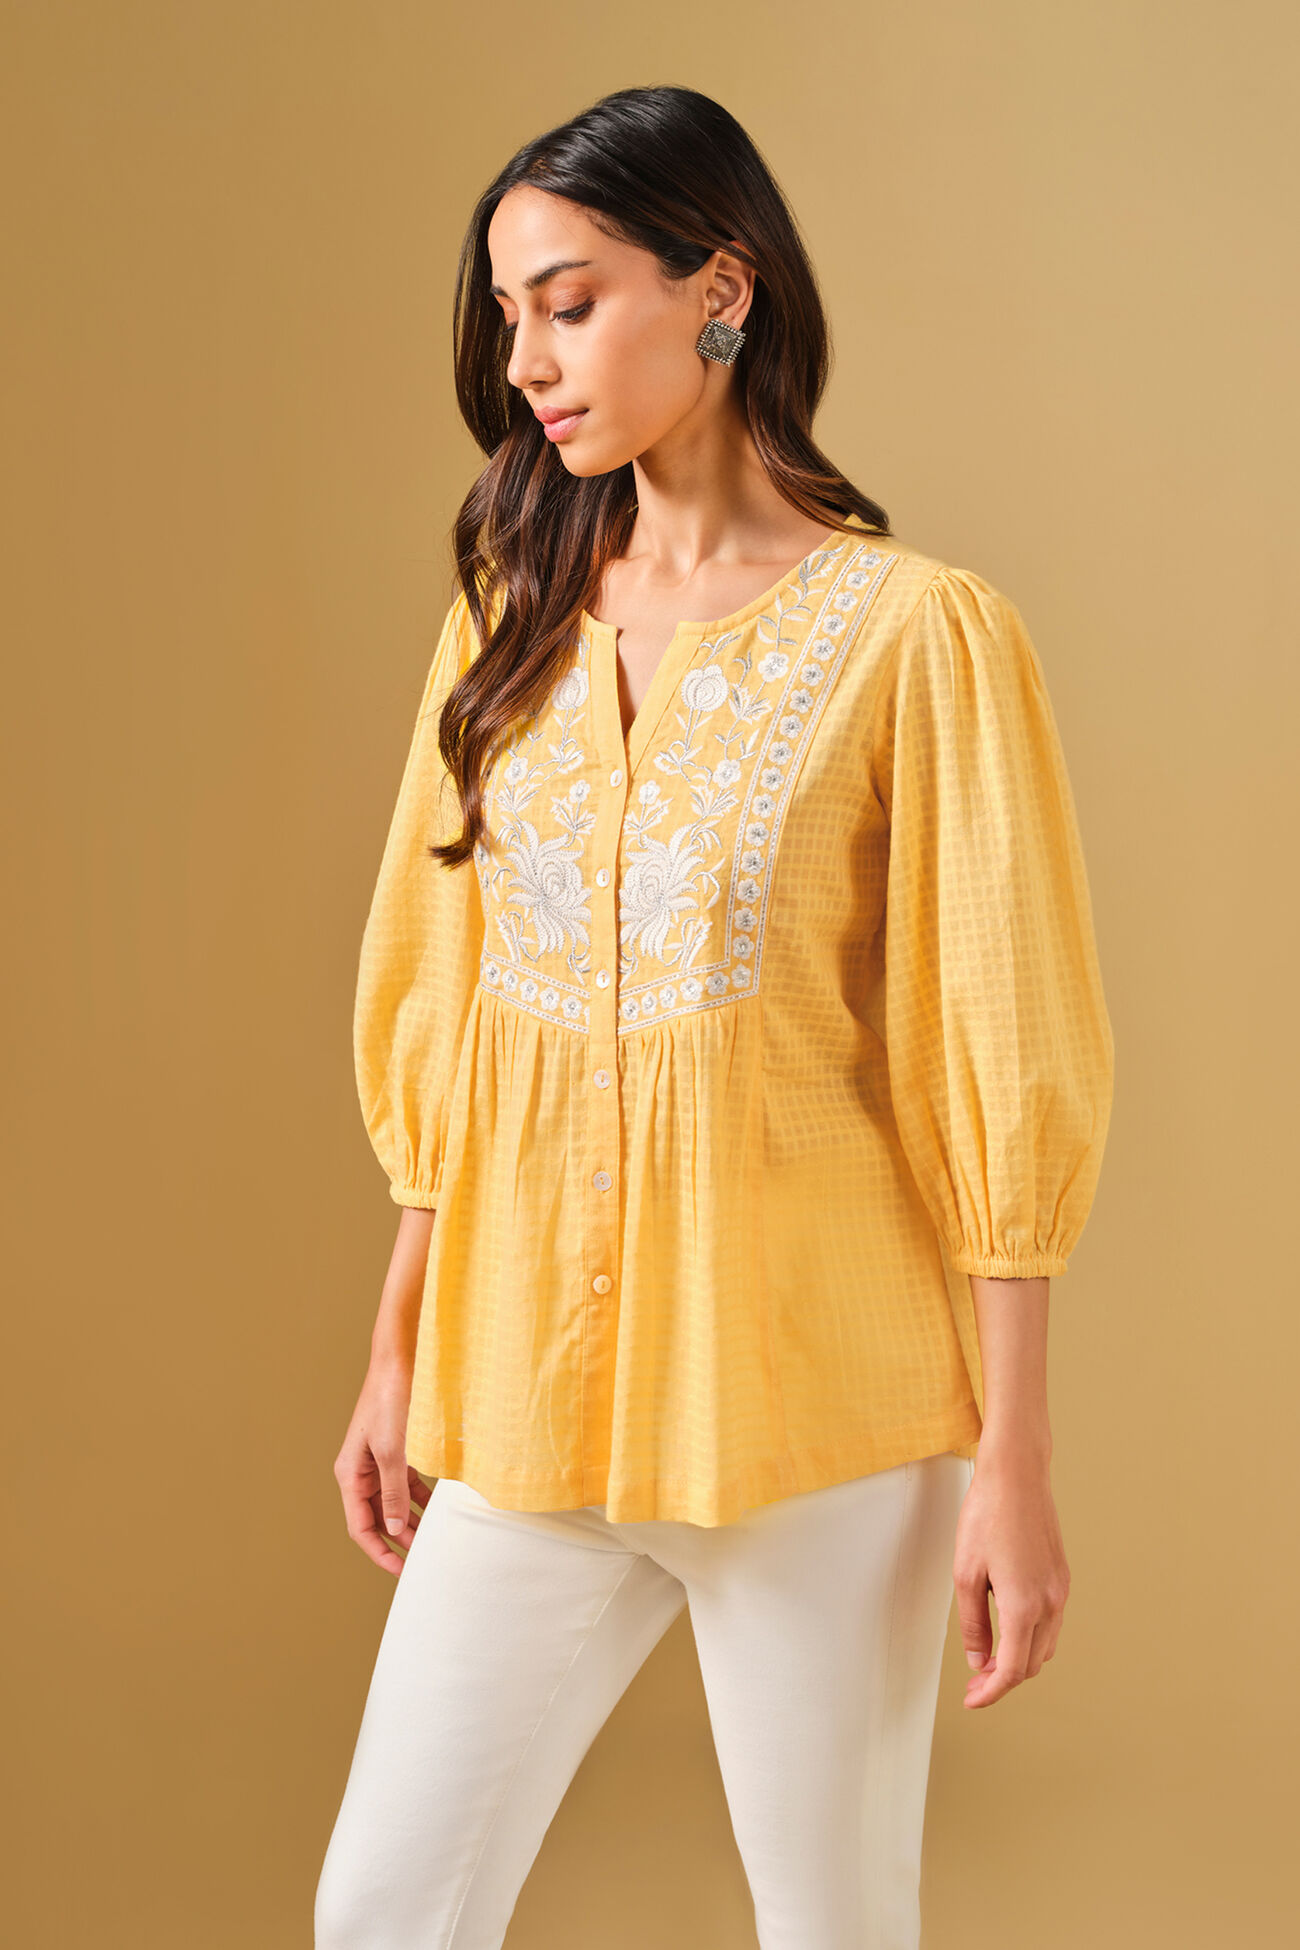 Floral Embroidered Yellow Viscose Top, Yellow, image 3